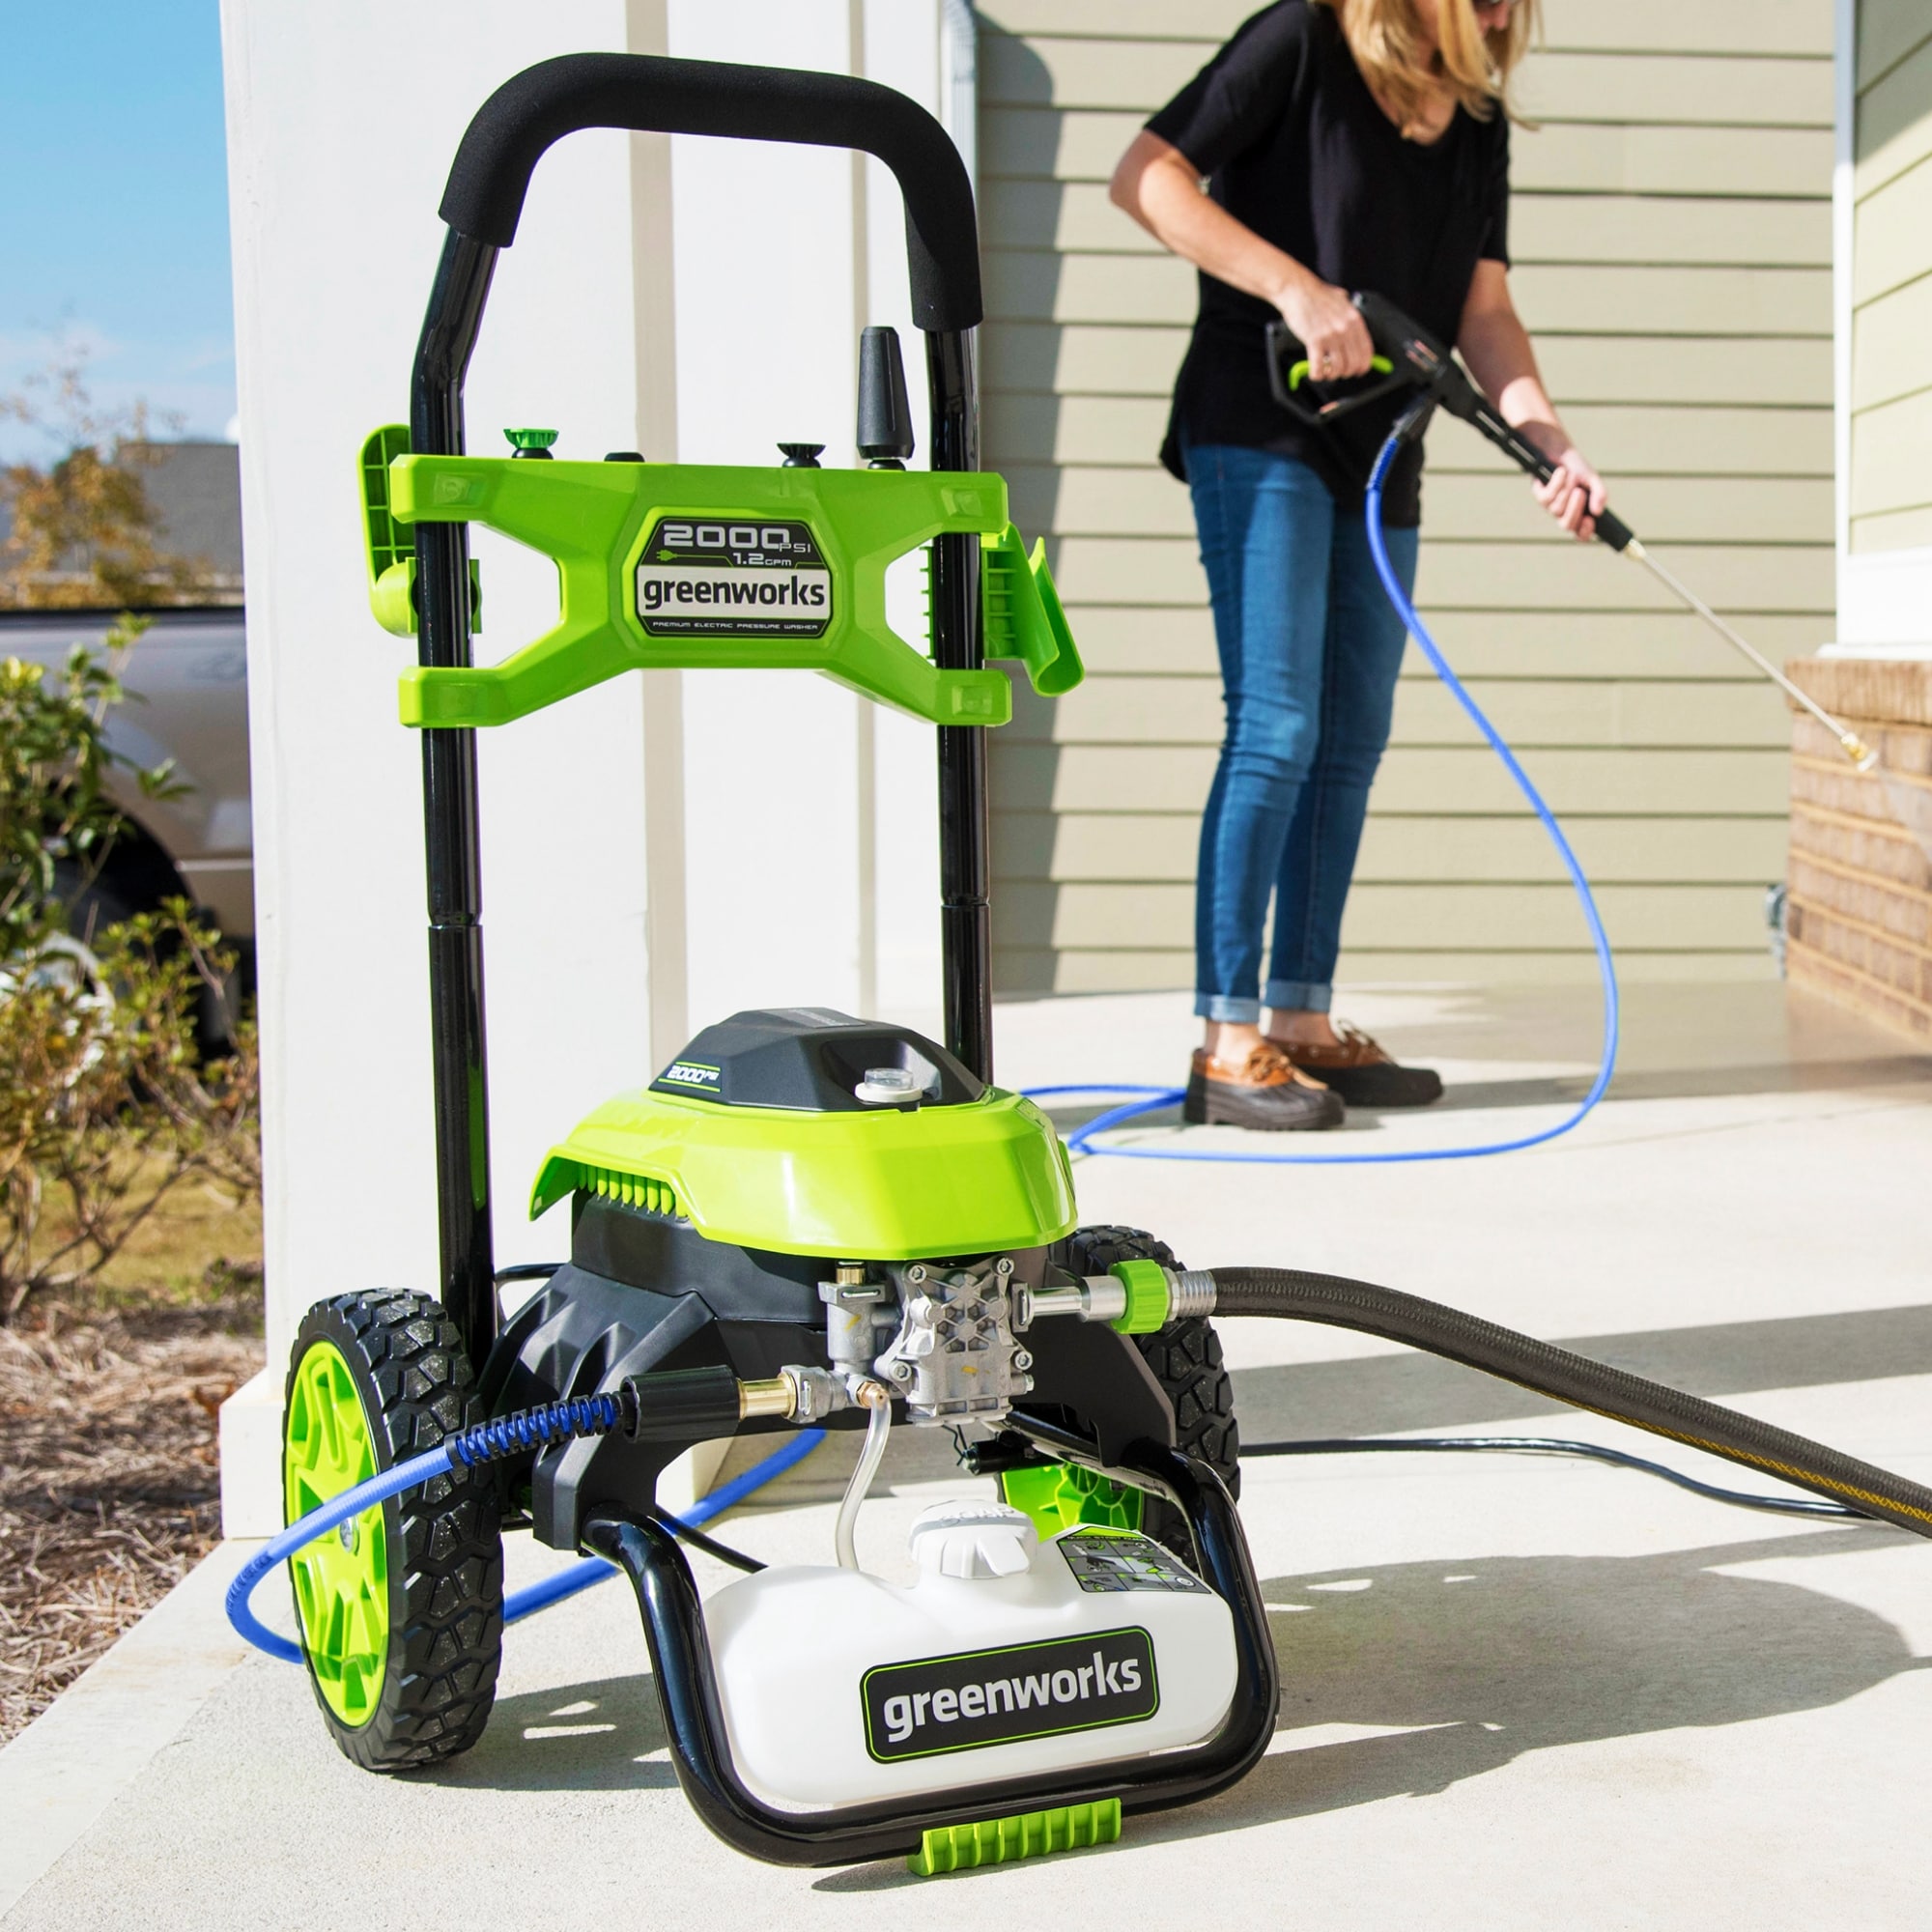 Greenworks Pressure Washer Secrets Revealed: 9 Must-Know Detergent and Soap Tips for Maximum Cleaning Power